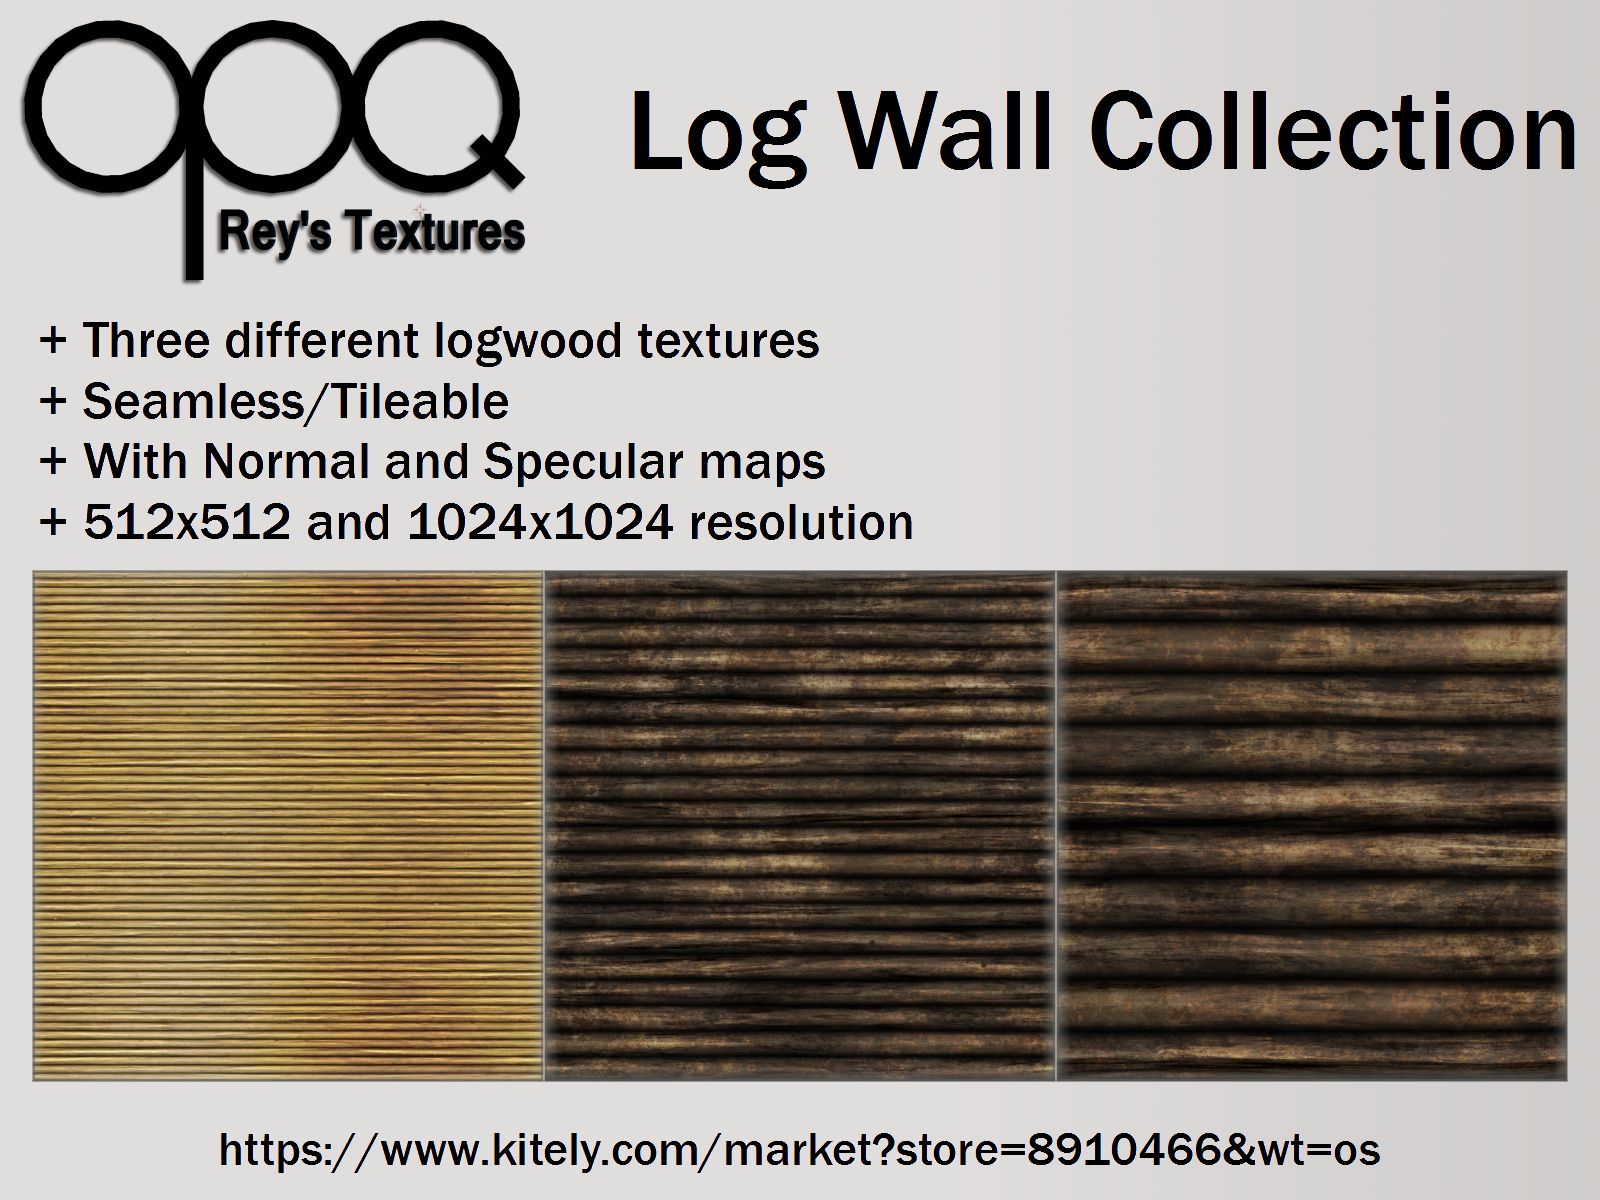 Rey's Log Wall Collection Poster Kitely.jpg